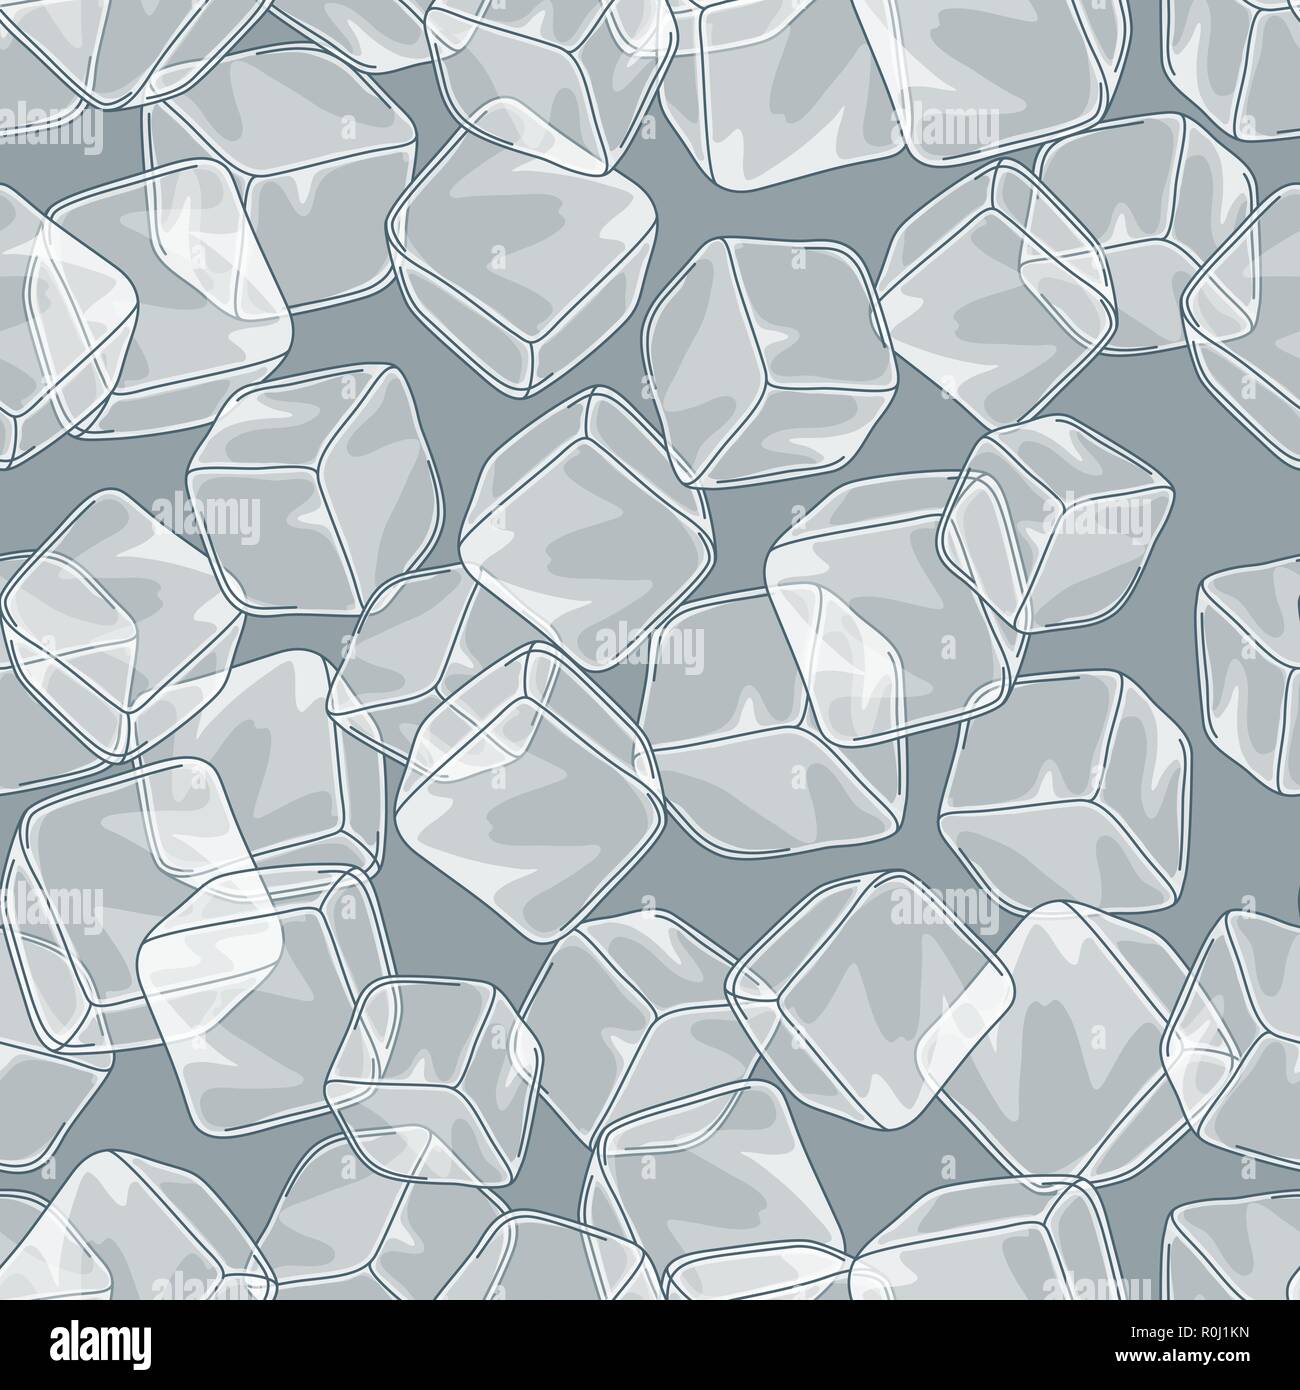 Seamless pattern with ice cubes. Stock Vector